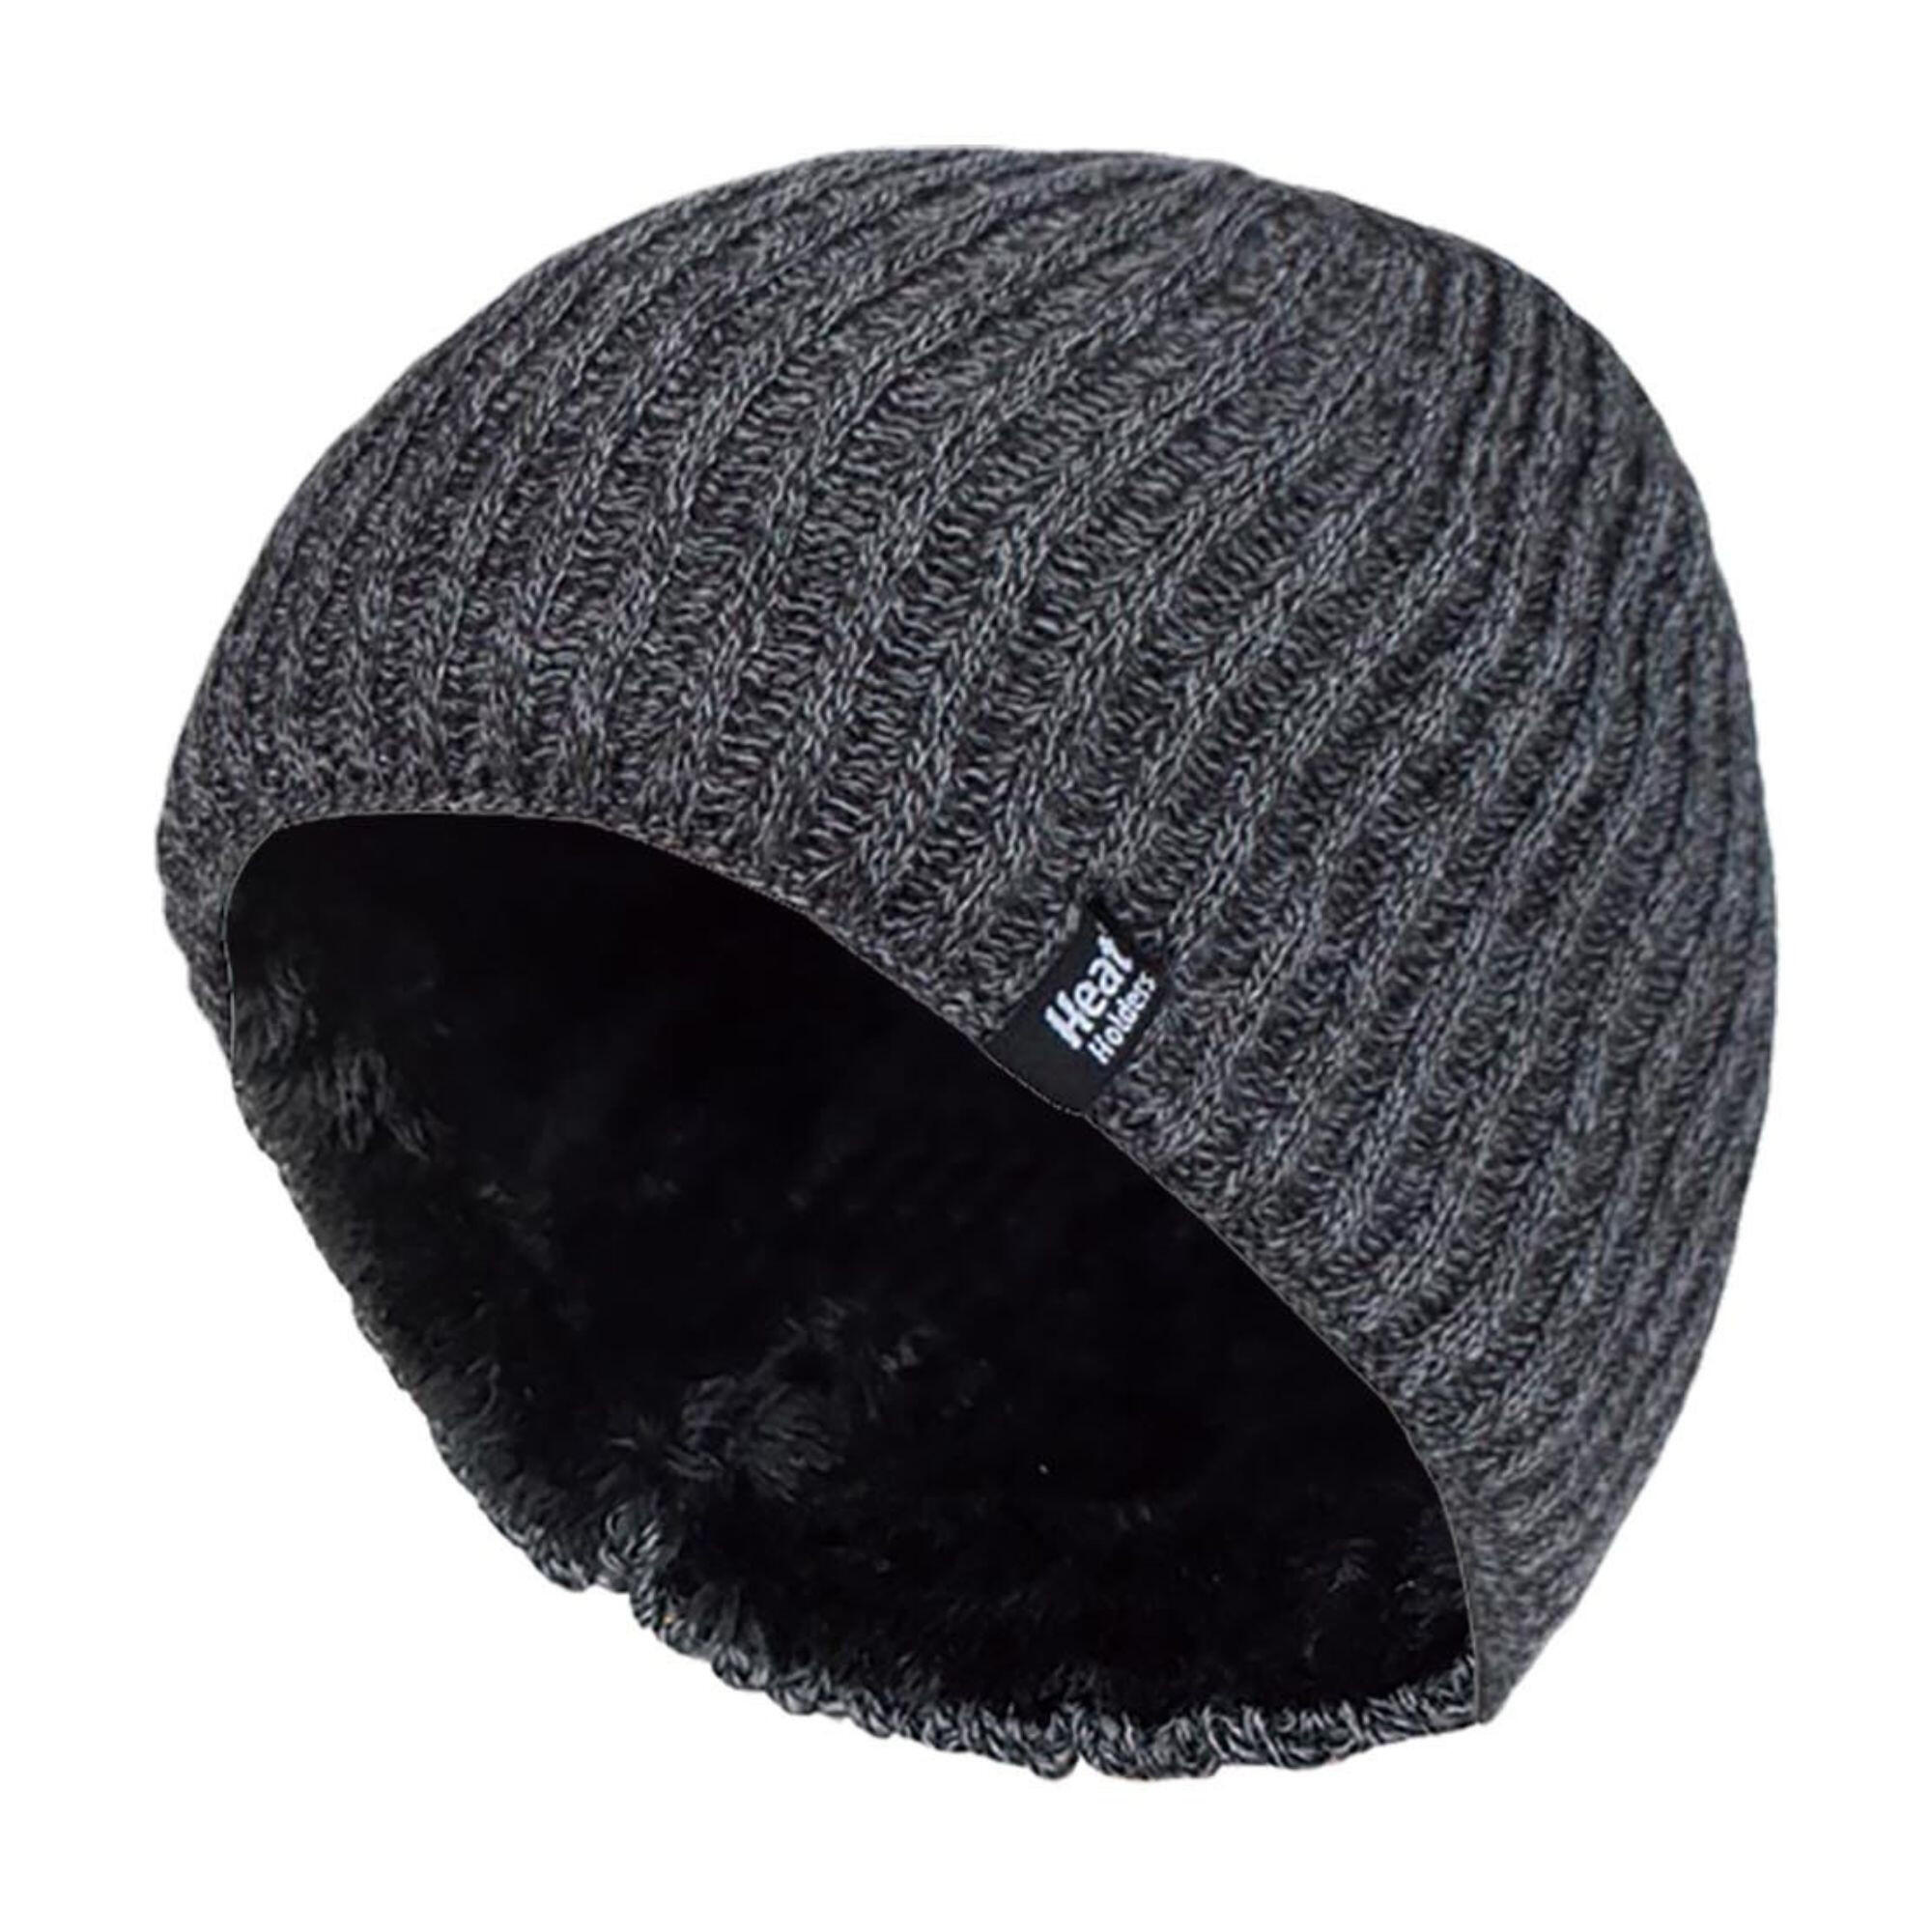 HEAT HOLDERS Mens Fleece Lined Thermal Winter Knitted Beanie Hat